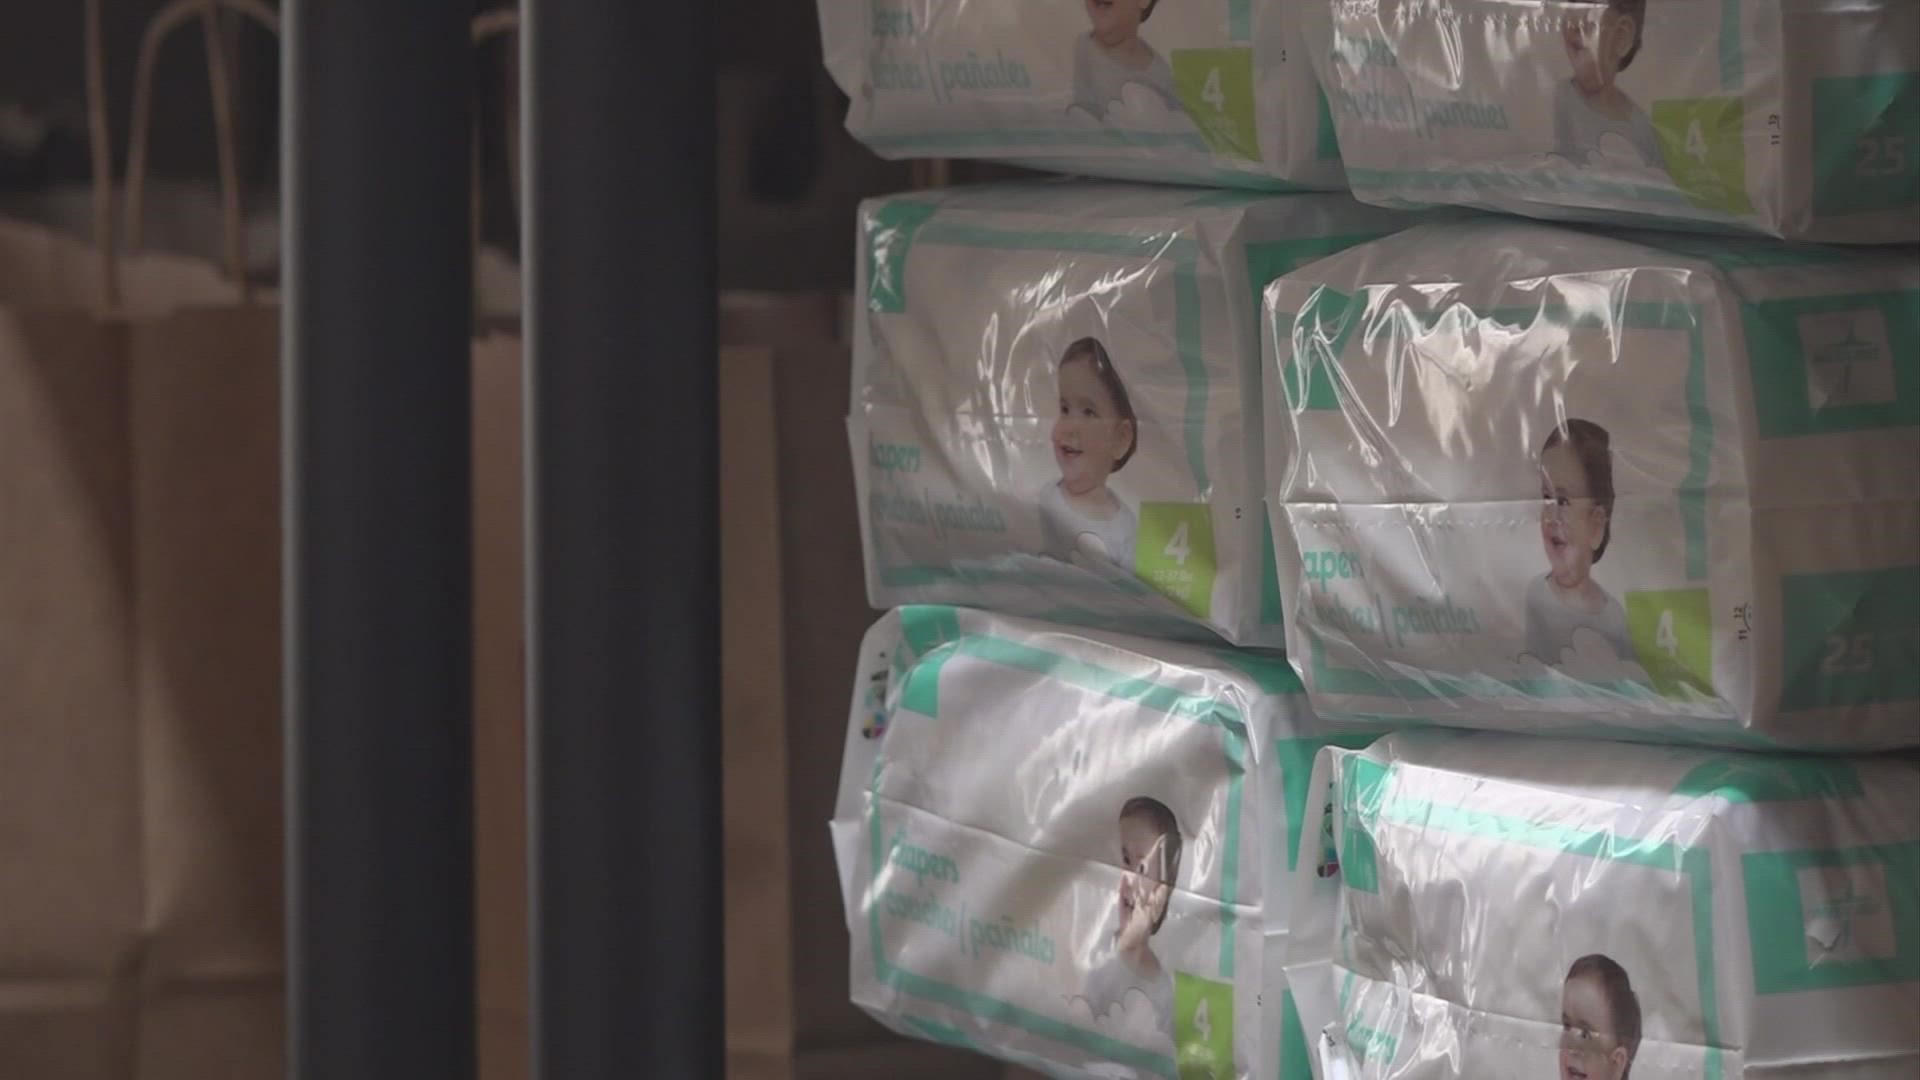 The Little Bottoms Free Store gives out baby items to families in need every Thursday. Their work is even more necessary with shortages across the country.